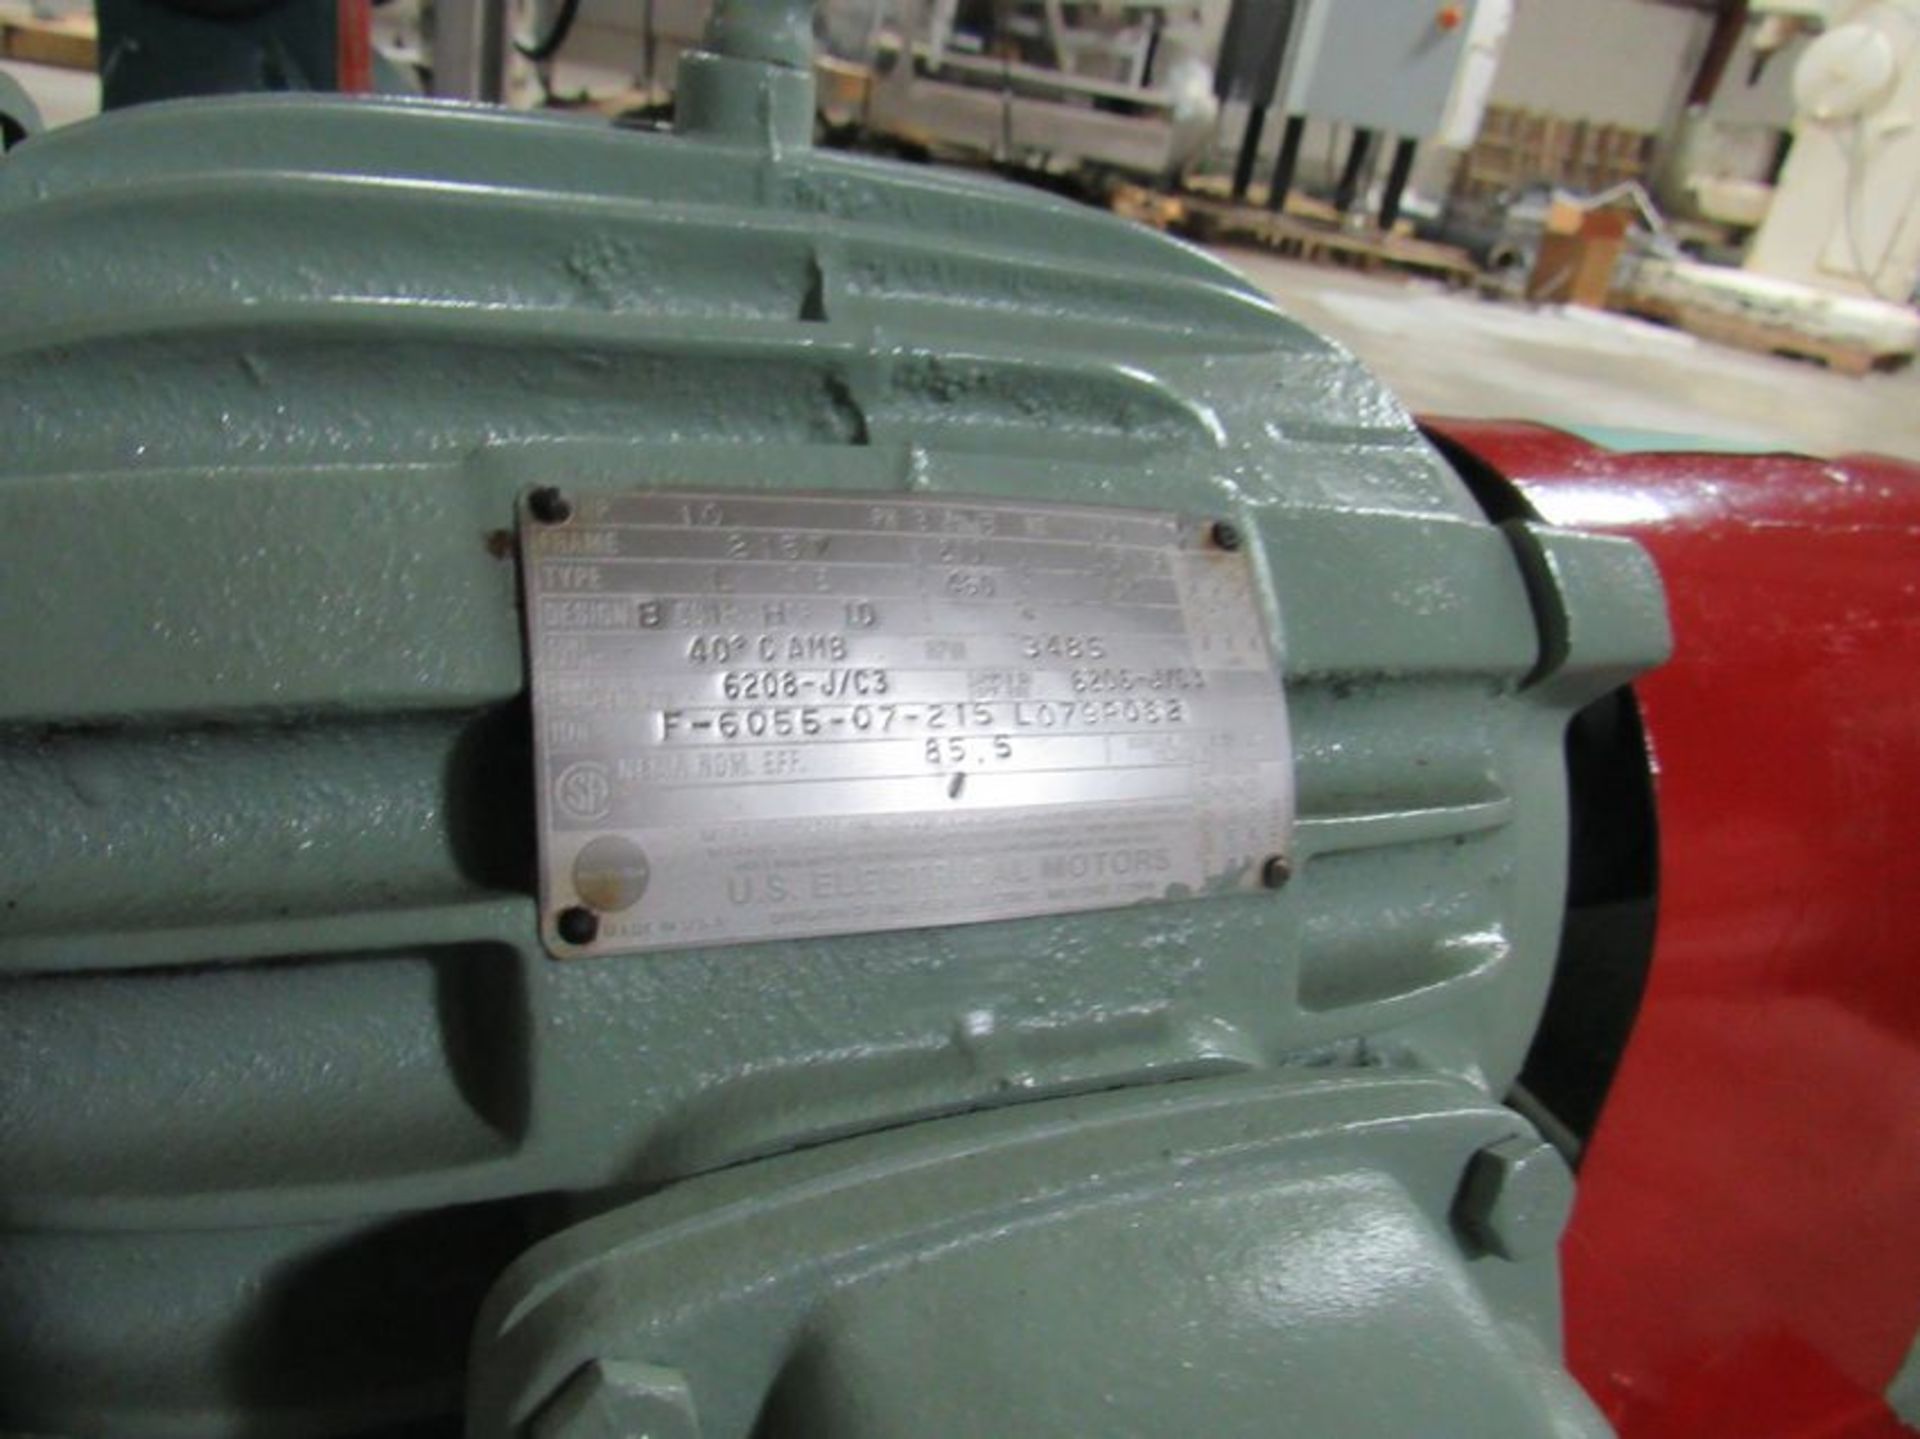 Worthington Centrifugal Pump Model D512, 1.5" by 1.0" Inlet/Outlet, Serial #Y648137P- Impeller - Image 5 of 10